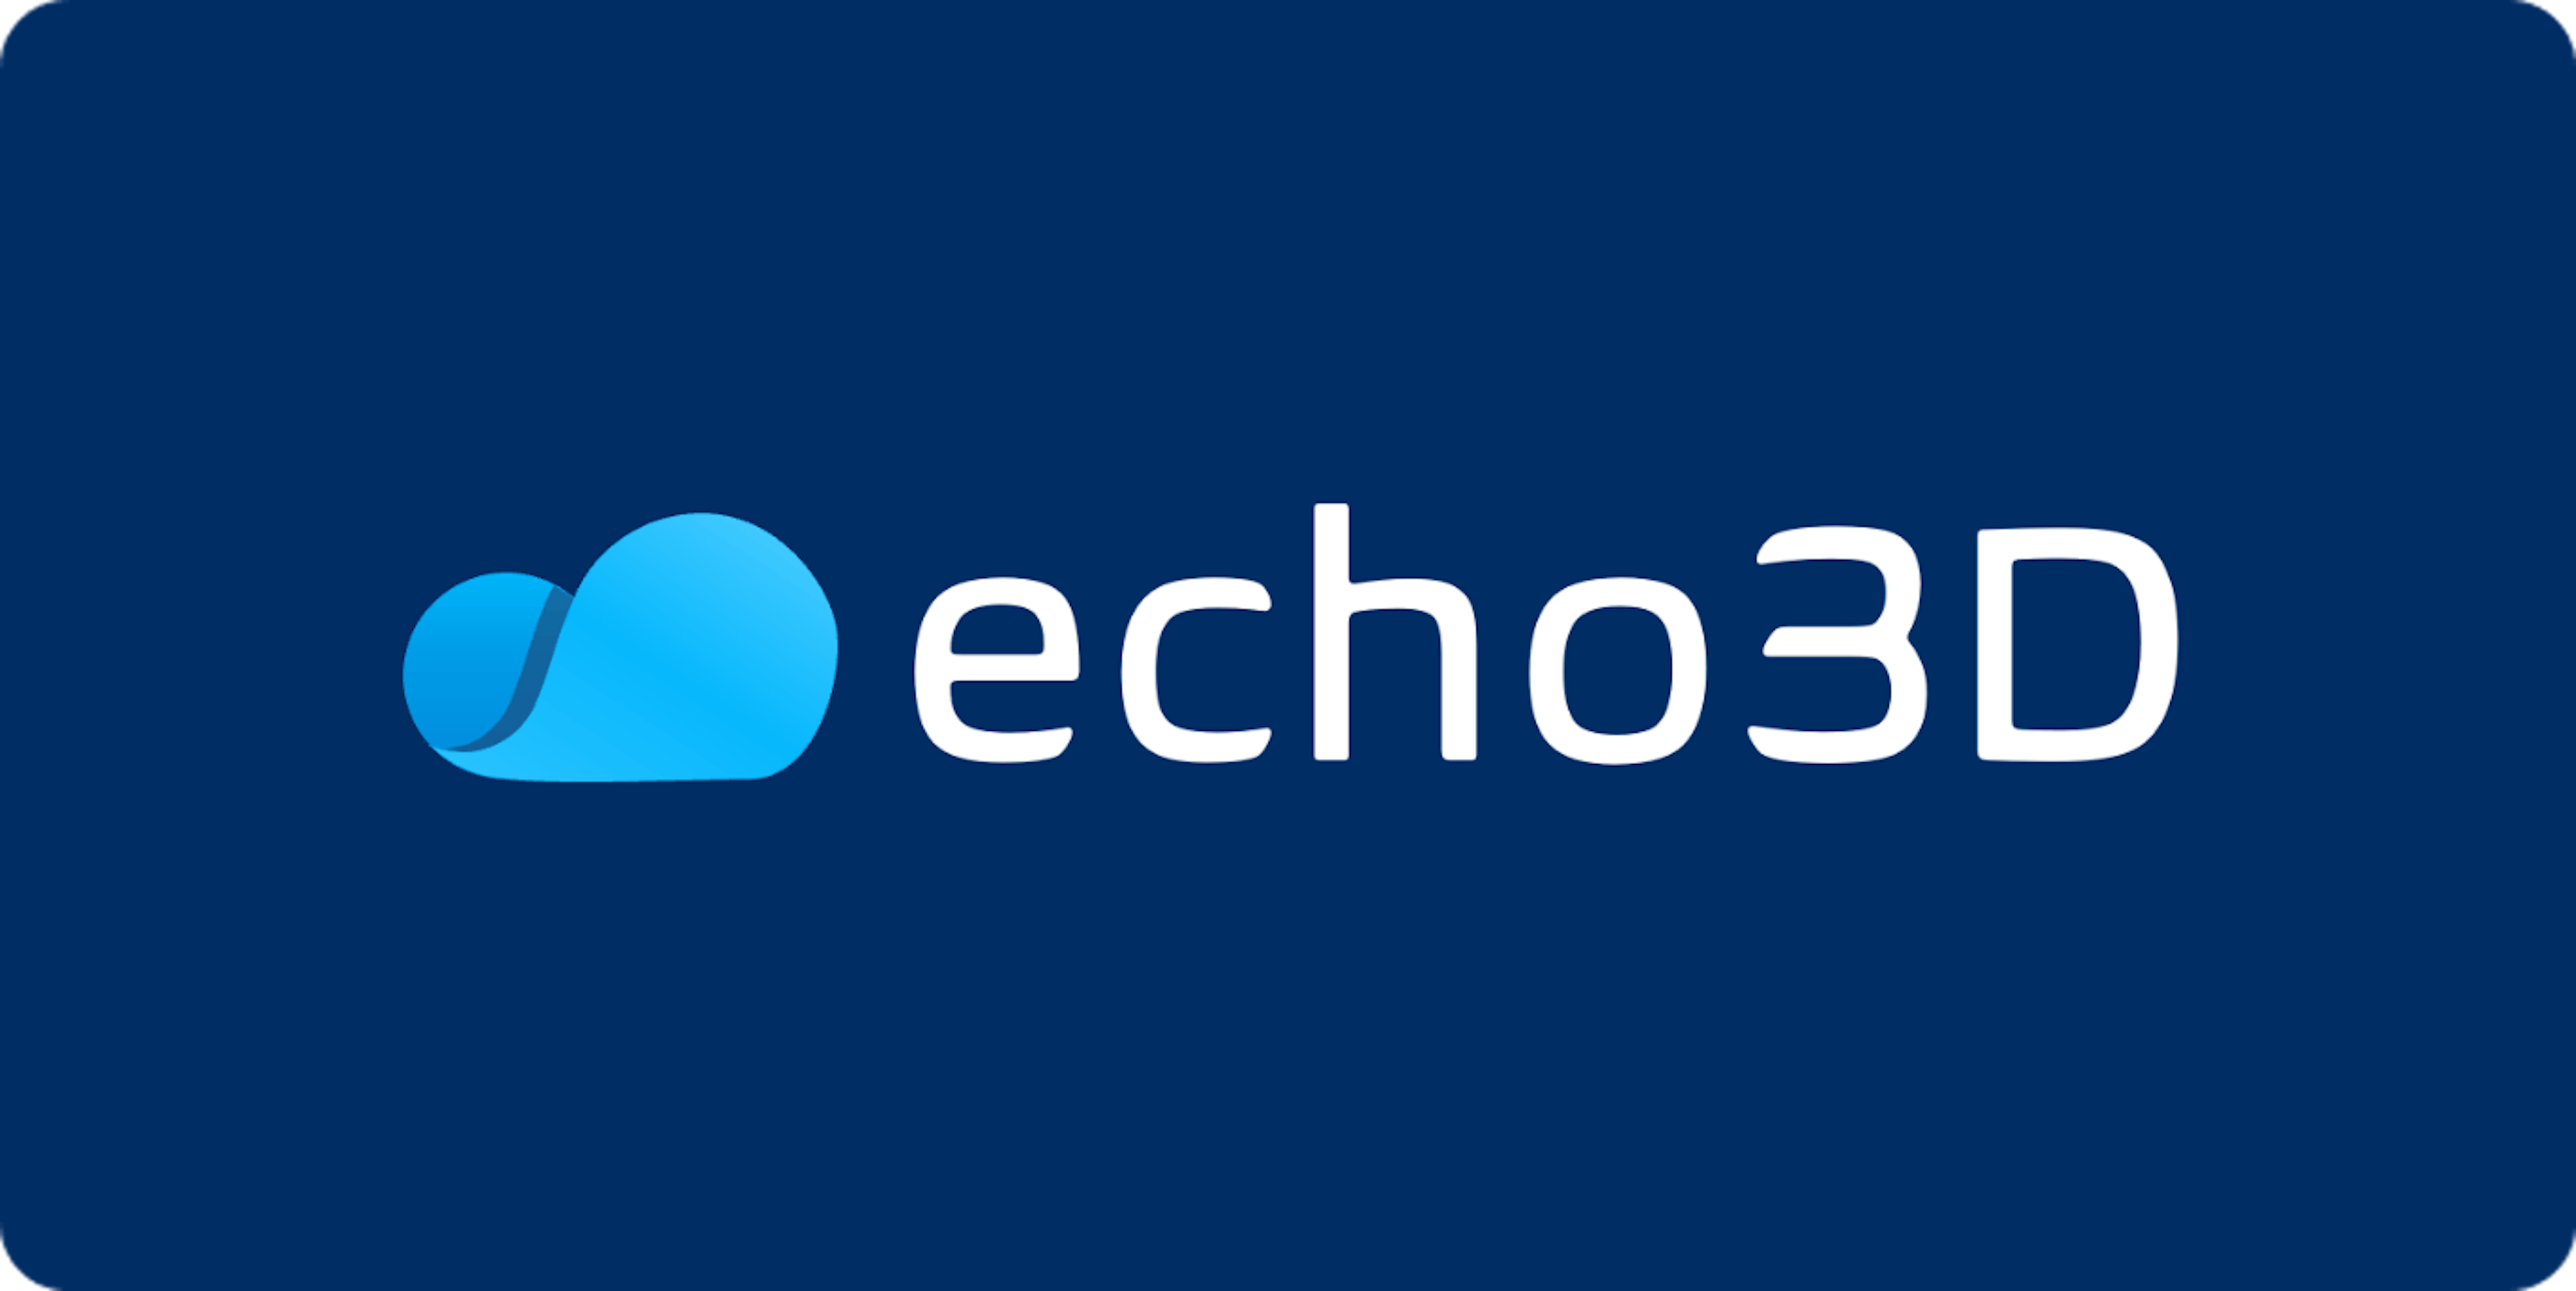 echo3d email